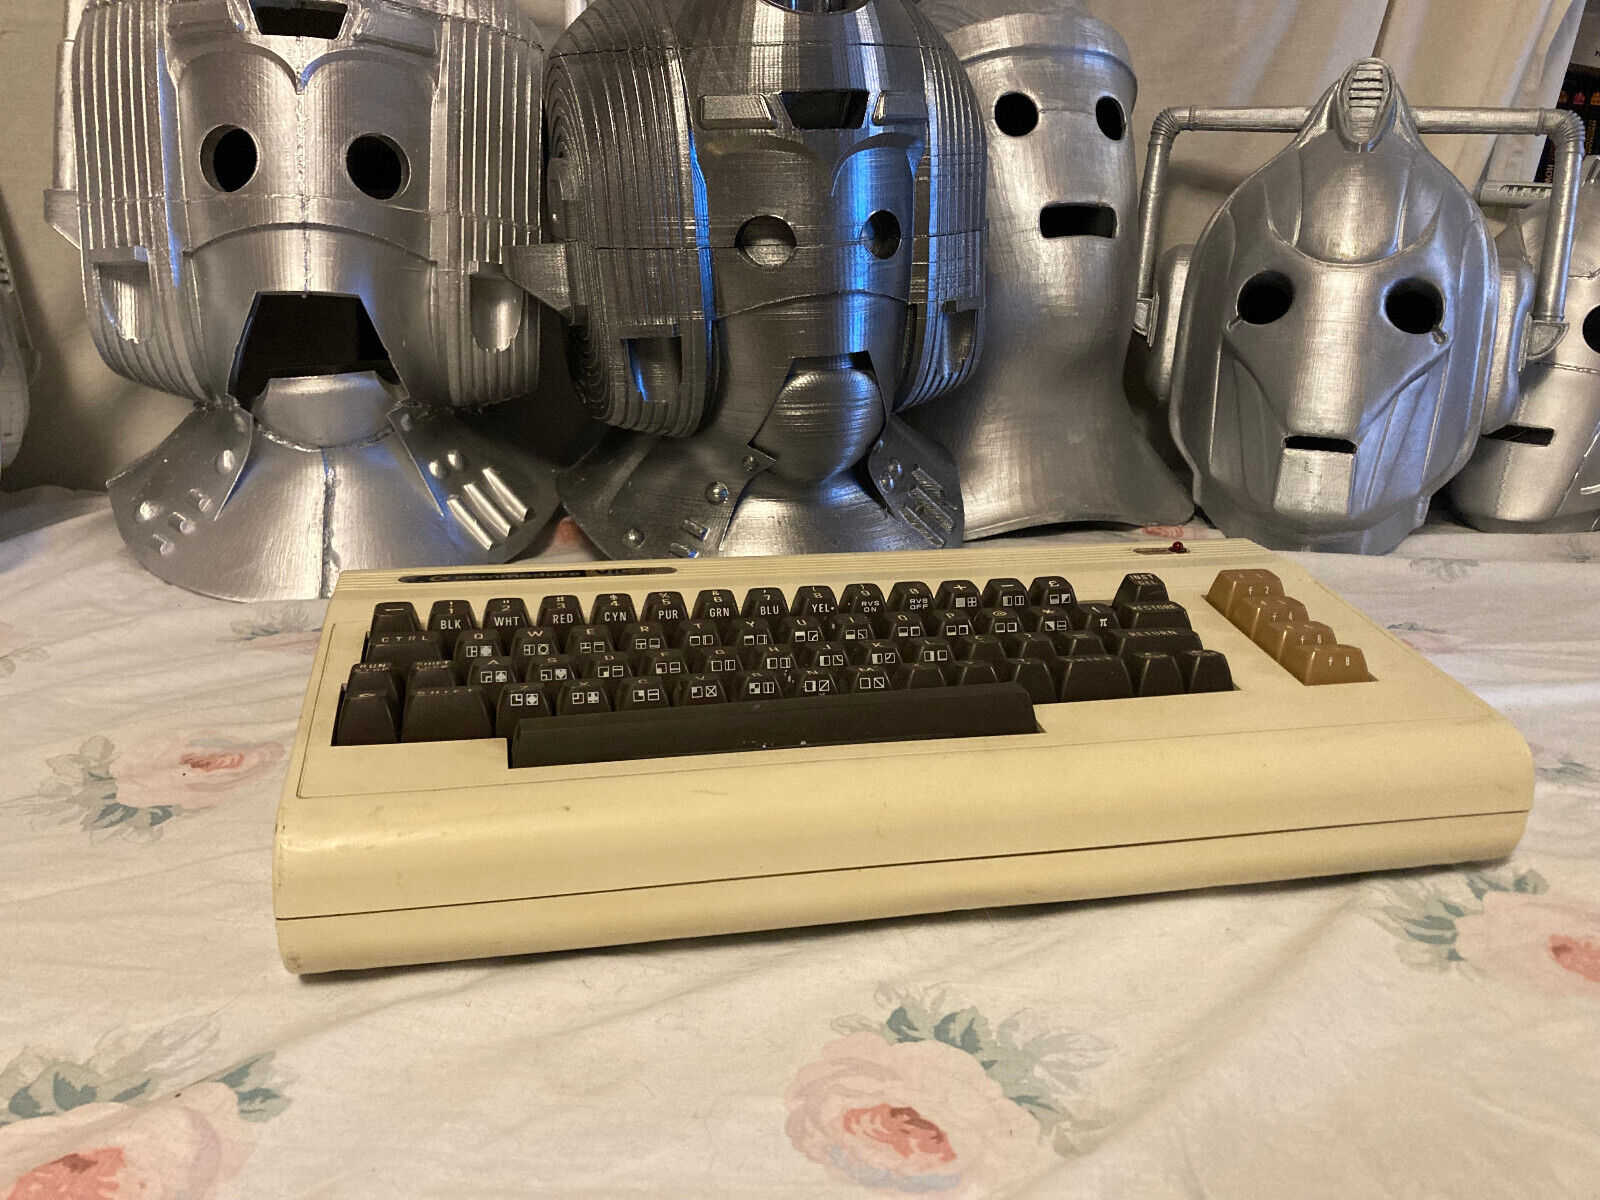 Early production 1981 Commodore VIC-20 Personal Computer Keyboard pre rainbow